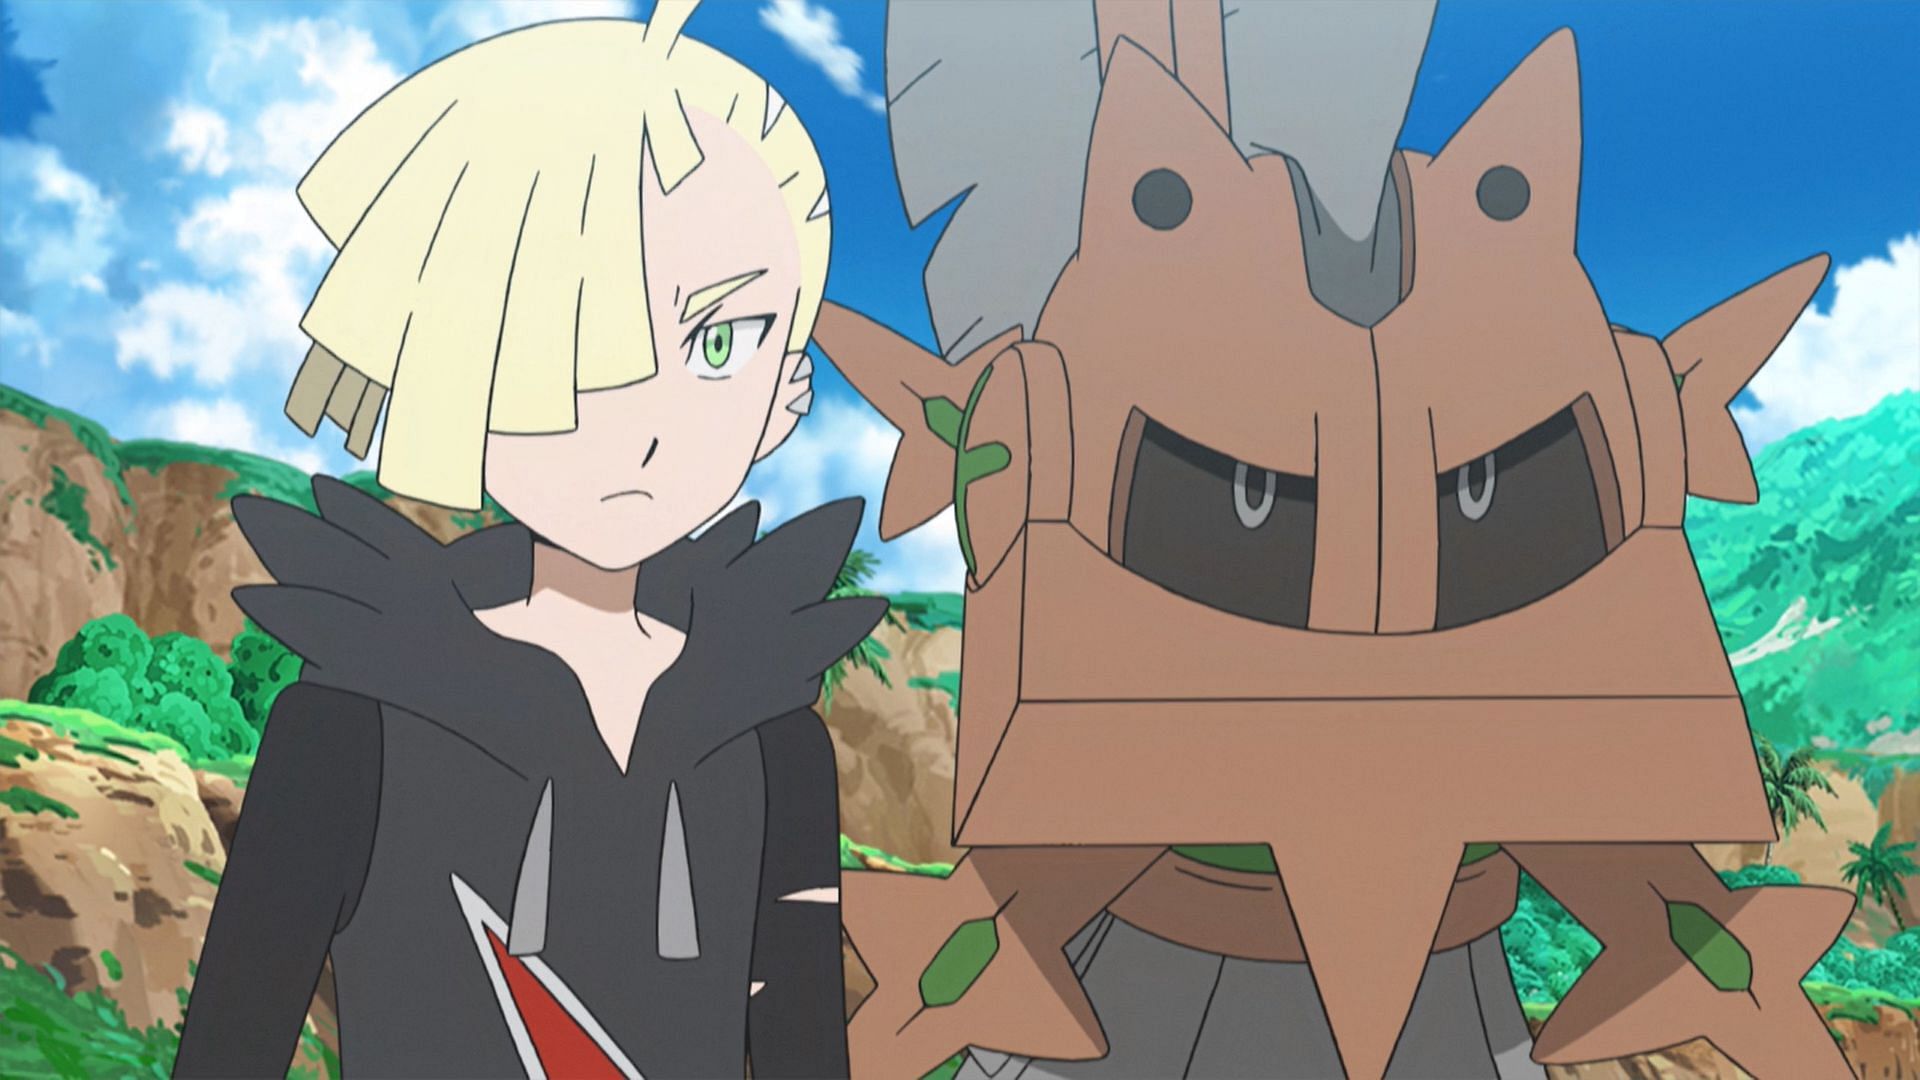 This episode features more background information on Silvally and Gladion in Pokemon Sun and Moon (Image via The Pokemon Company)